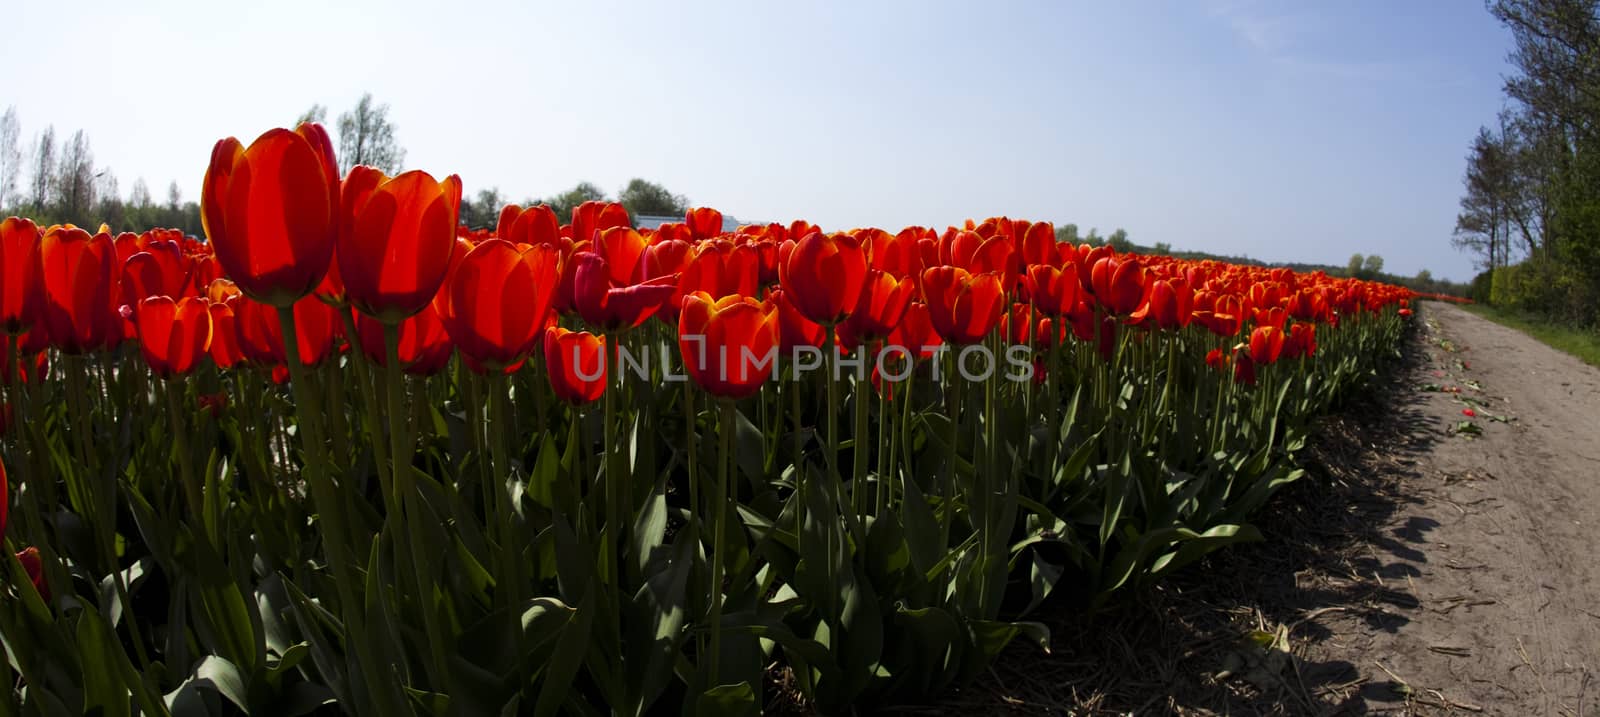 Flowers are blooming on the field, tulips